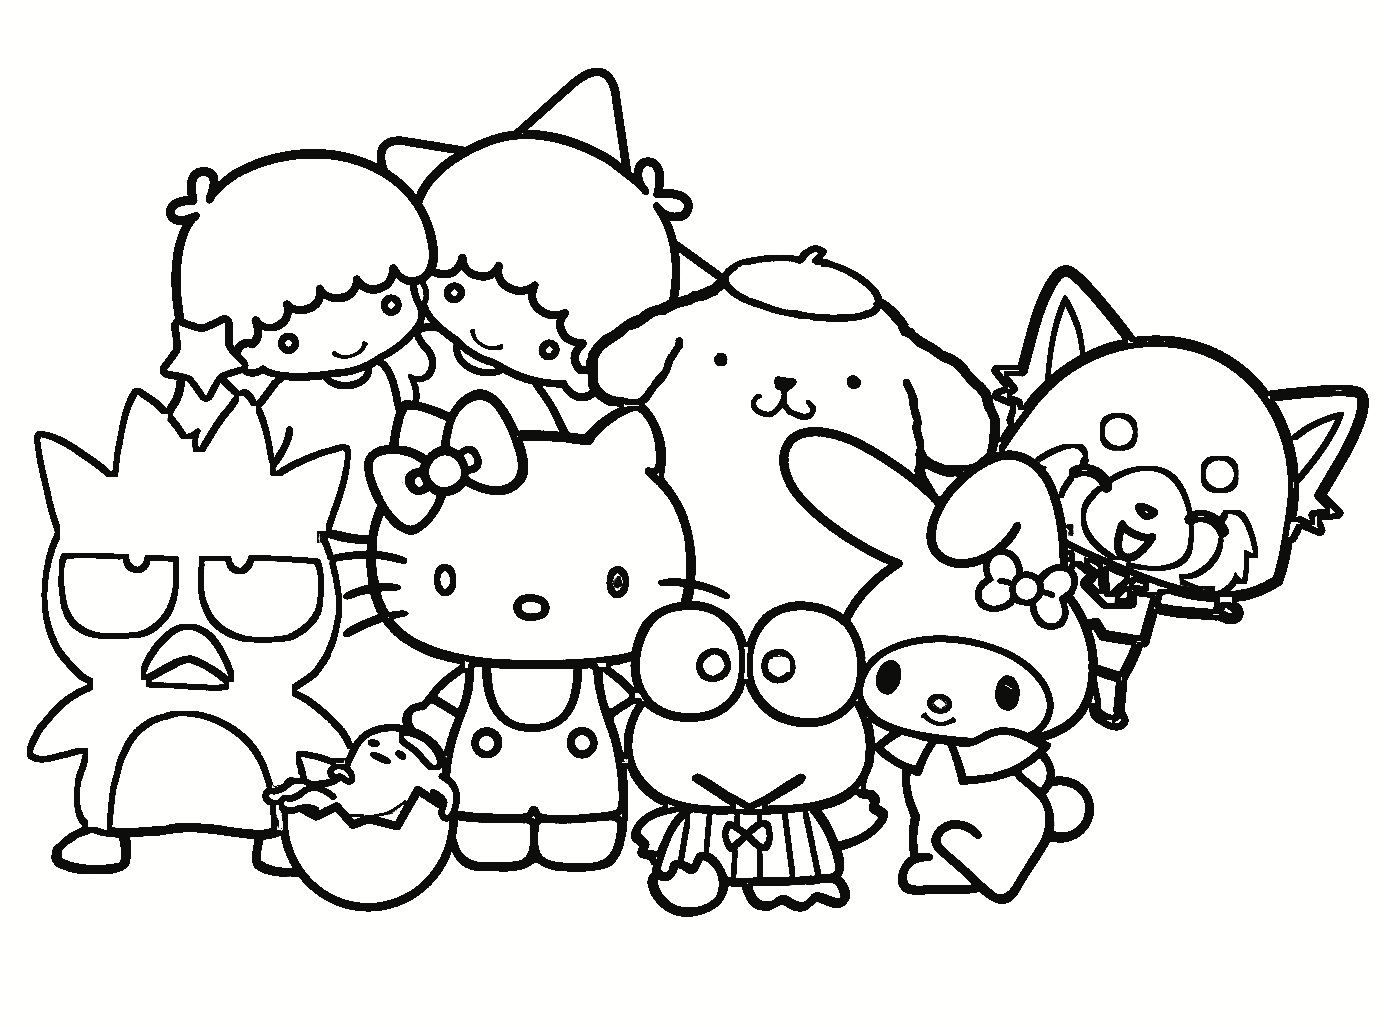 Sanrio Characters Coloring Page